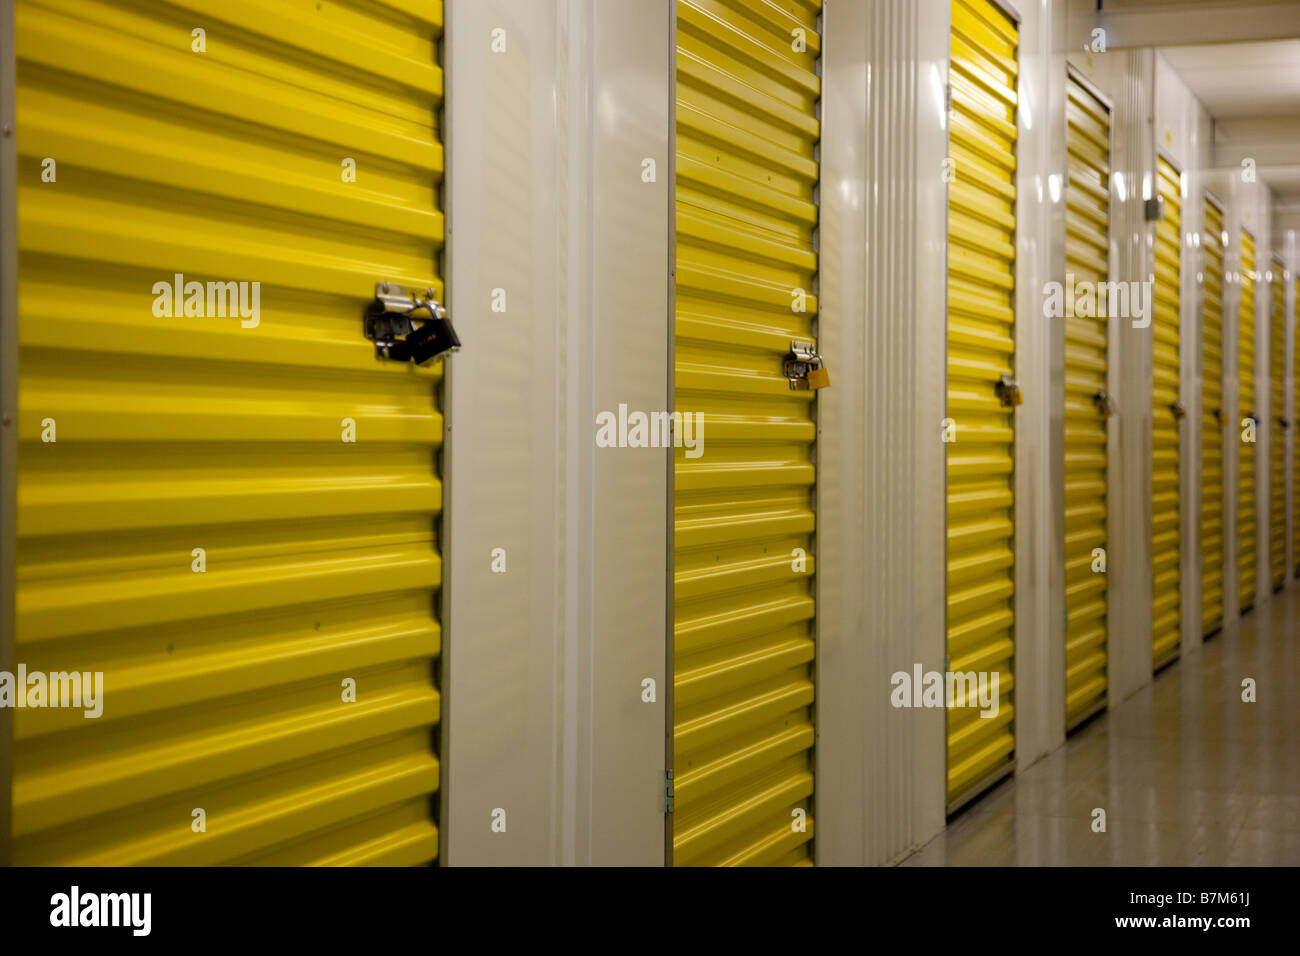 Secure storage units in a self storage facility Stock Photo